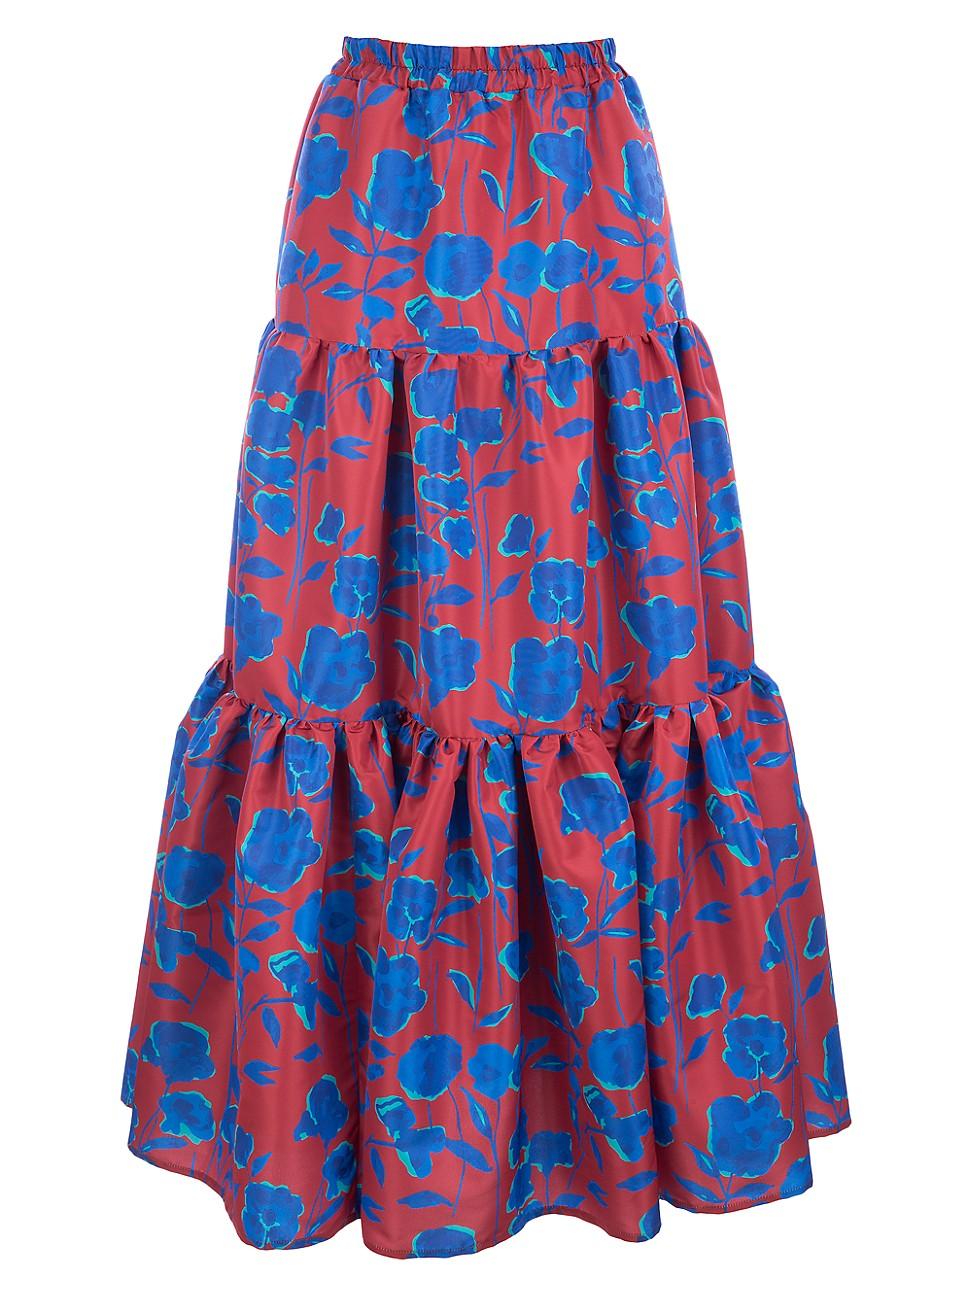 LaDoubleJ Synthetic Edition 22 Faile Floral Tier Maxi Skirt in Blue - Lyst